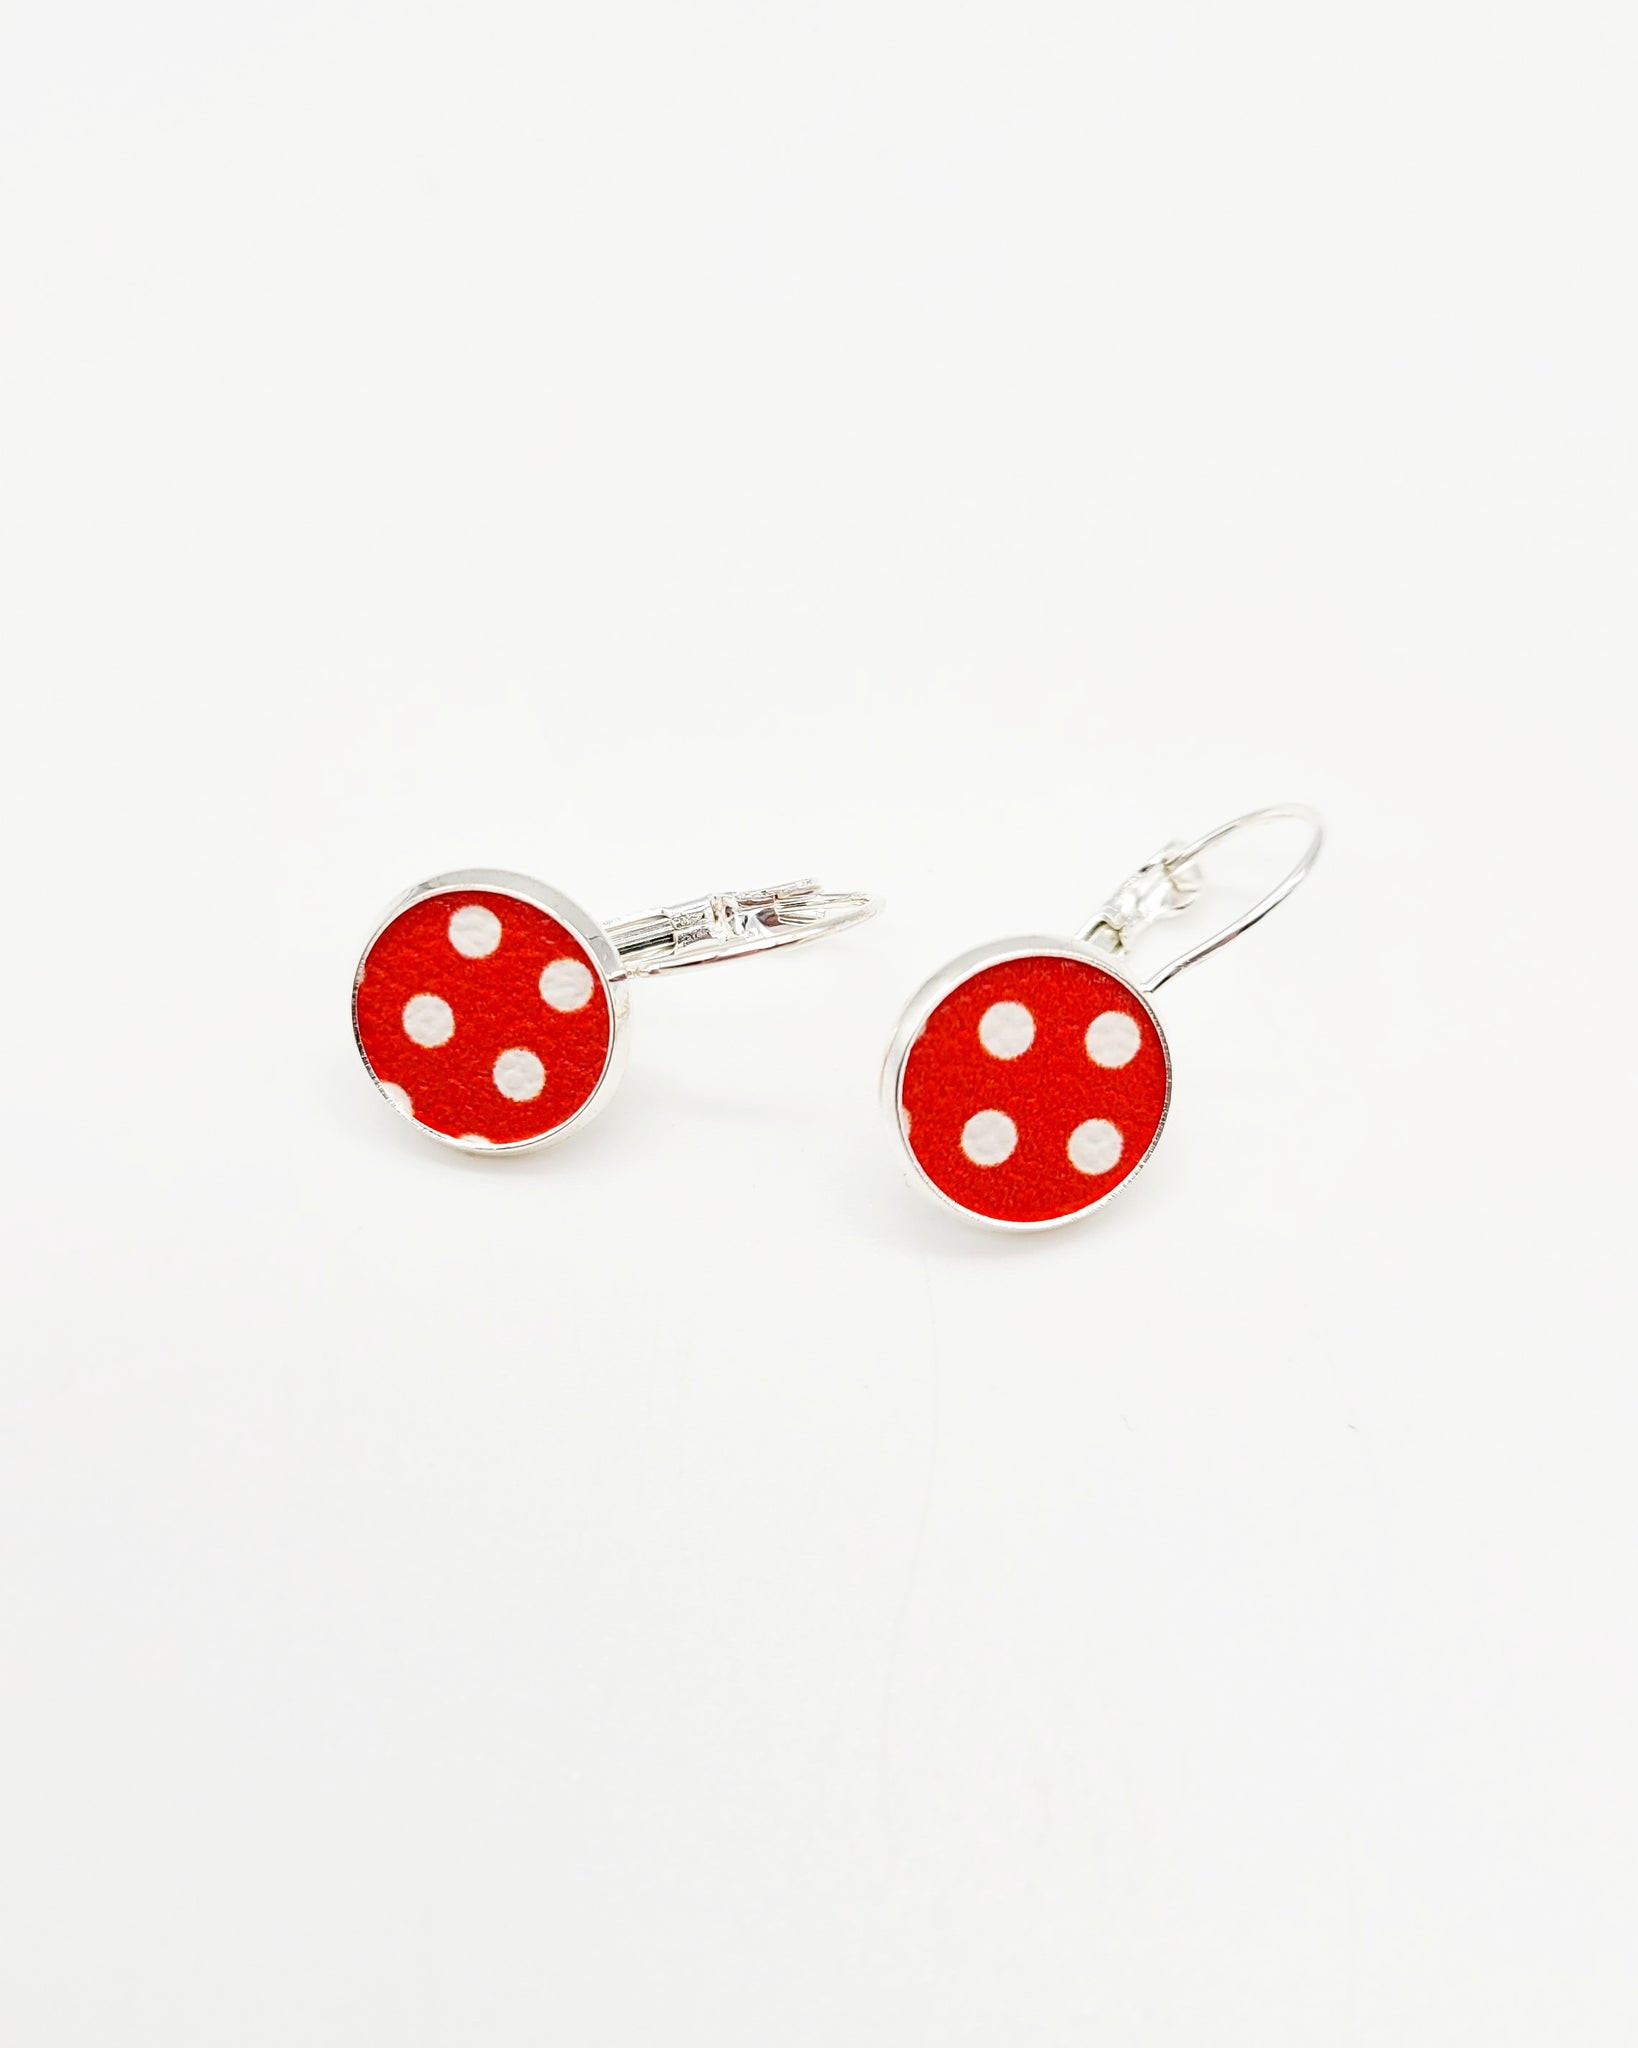 Red and White Polka Dot Leverback Earrings